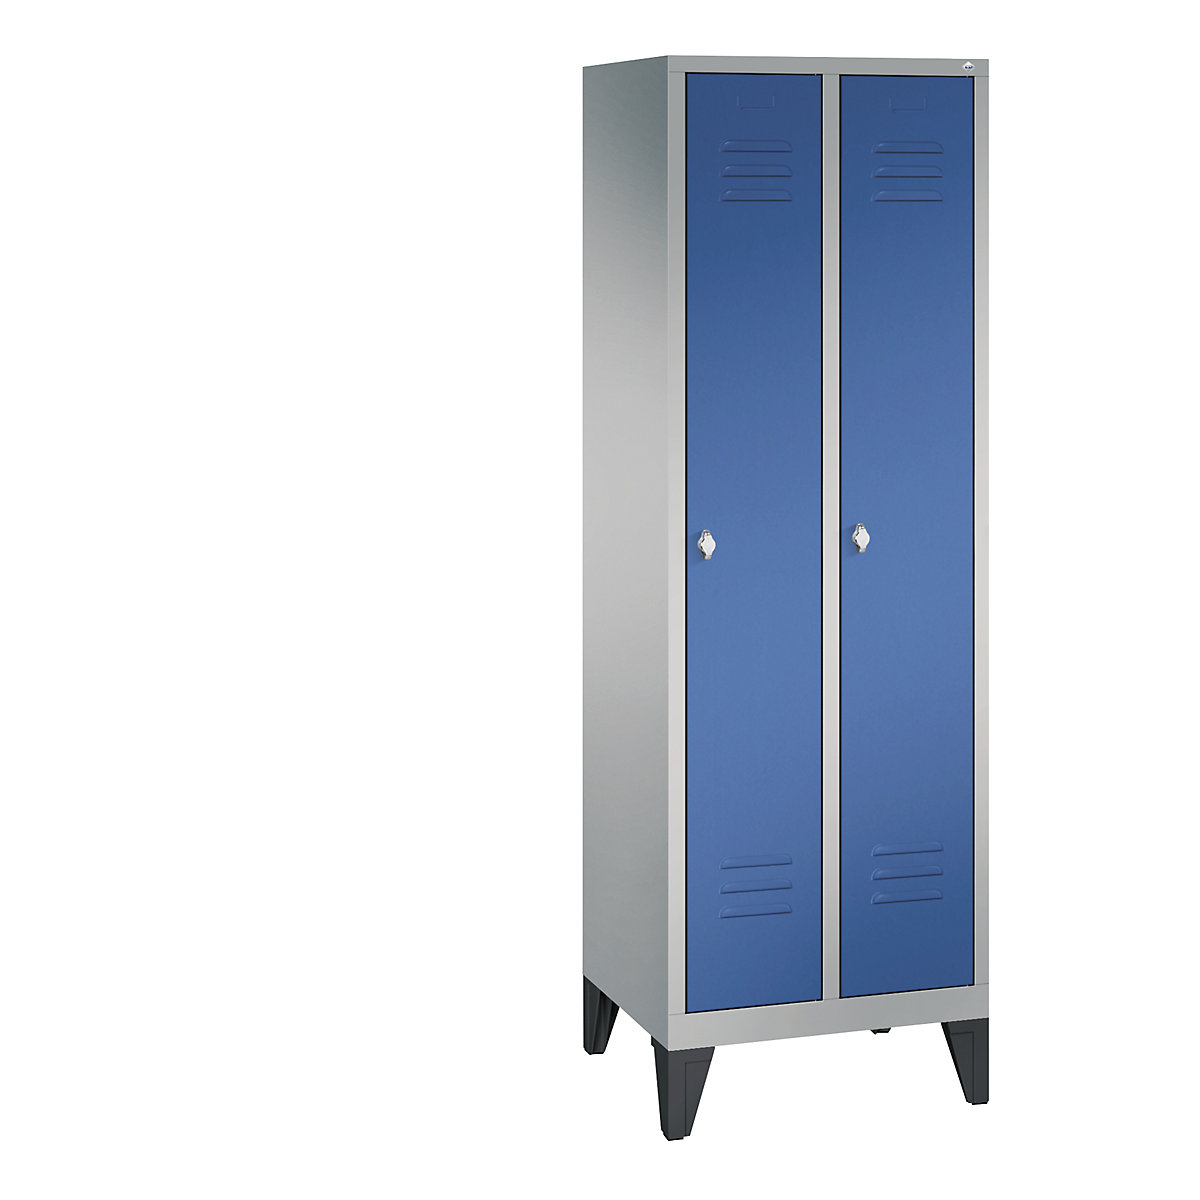 CLASSIC cloakroom locker with feet – C+P, 2 compartments, compartment width 300 mm, white aluminium / gentian blue-10